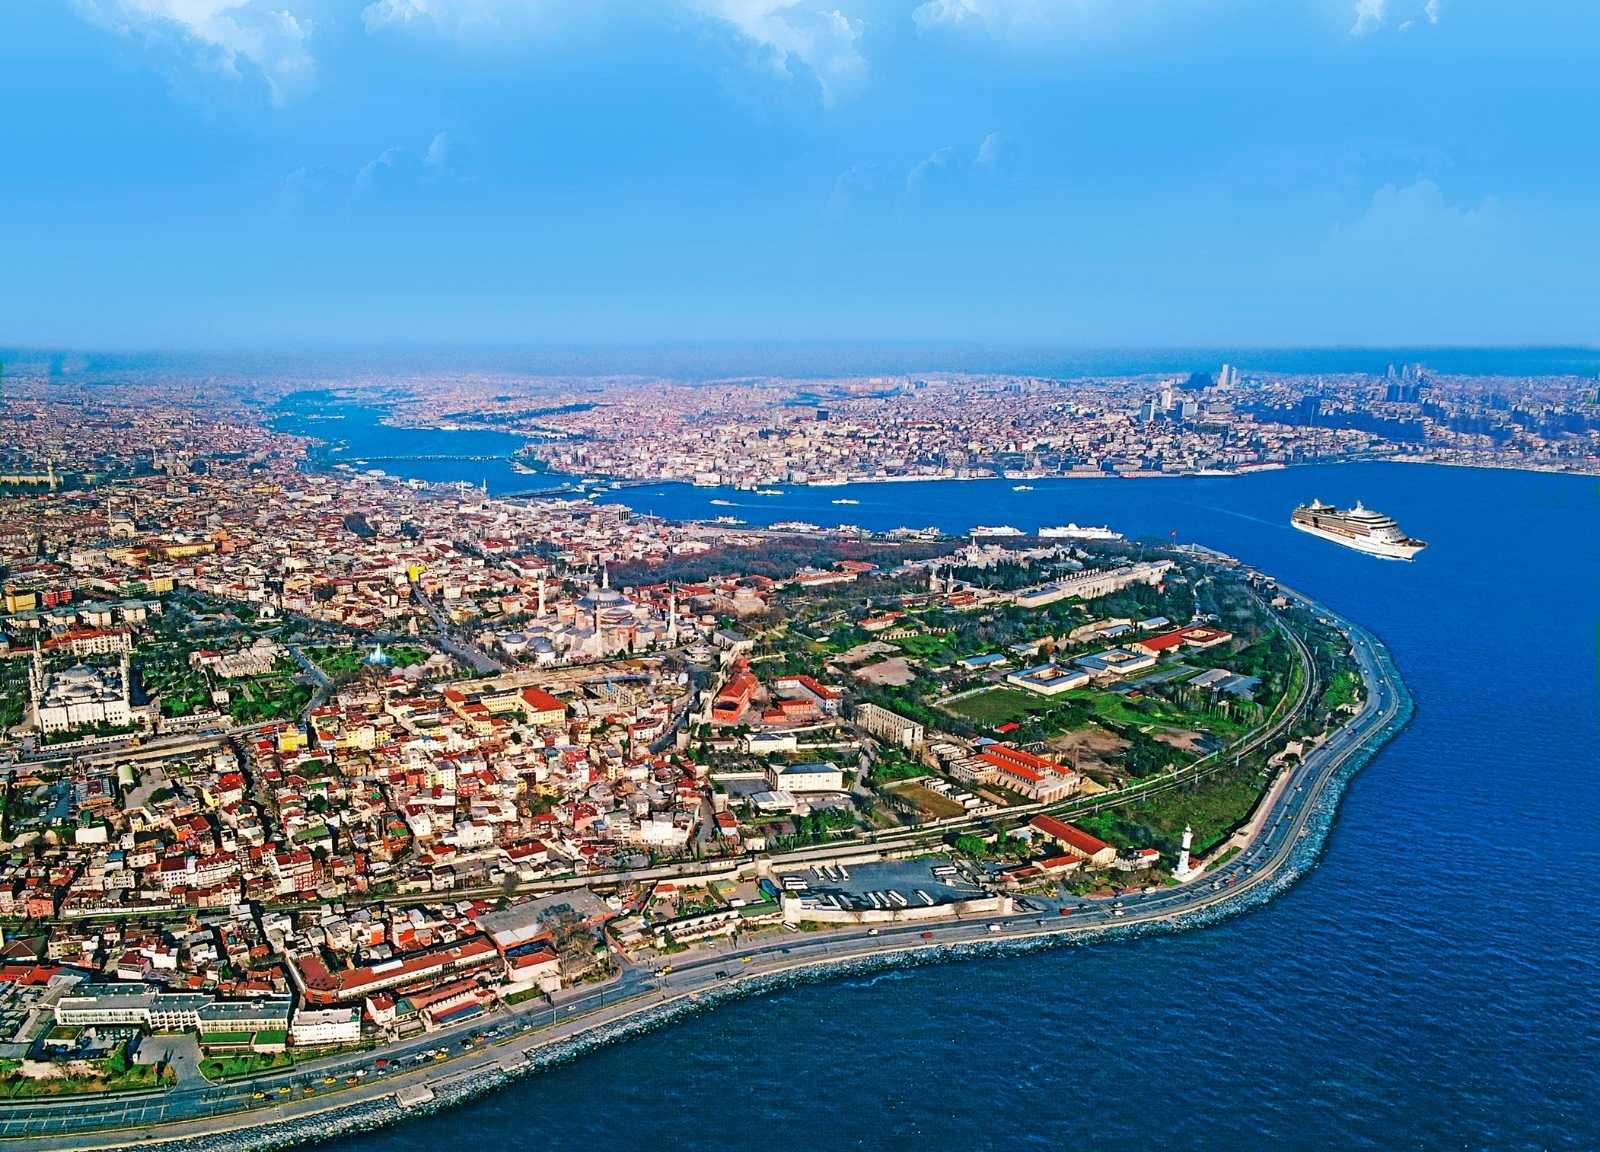 The Splendor of the Seven Hills of Istanbul